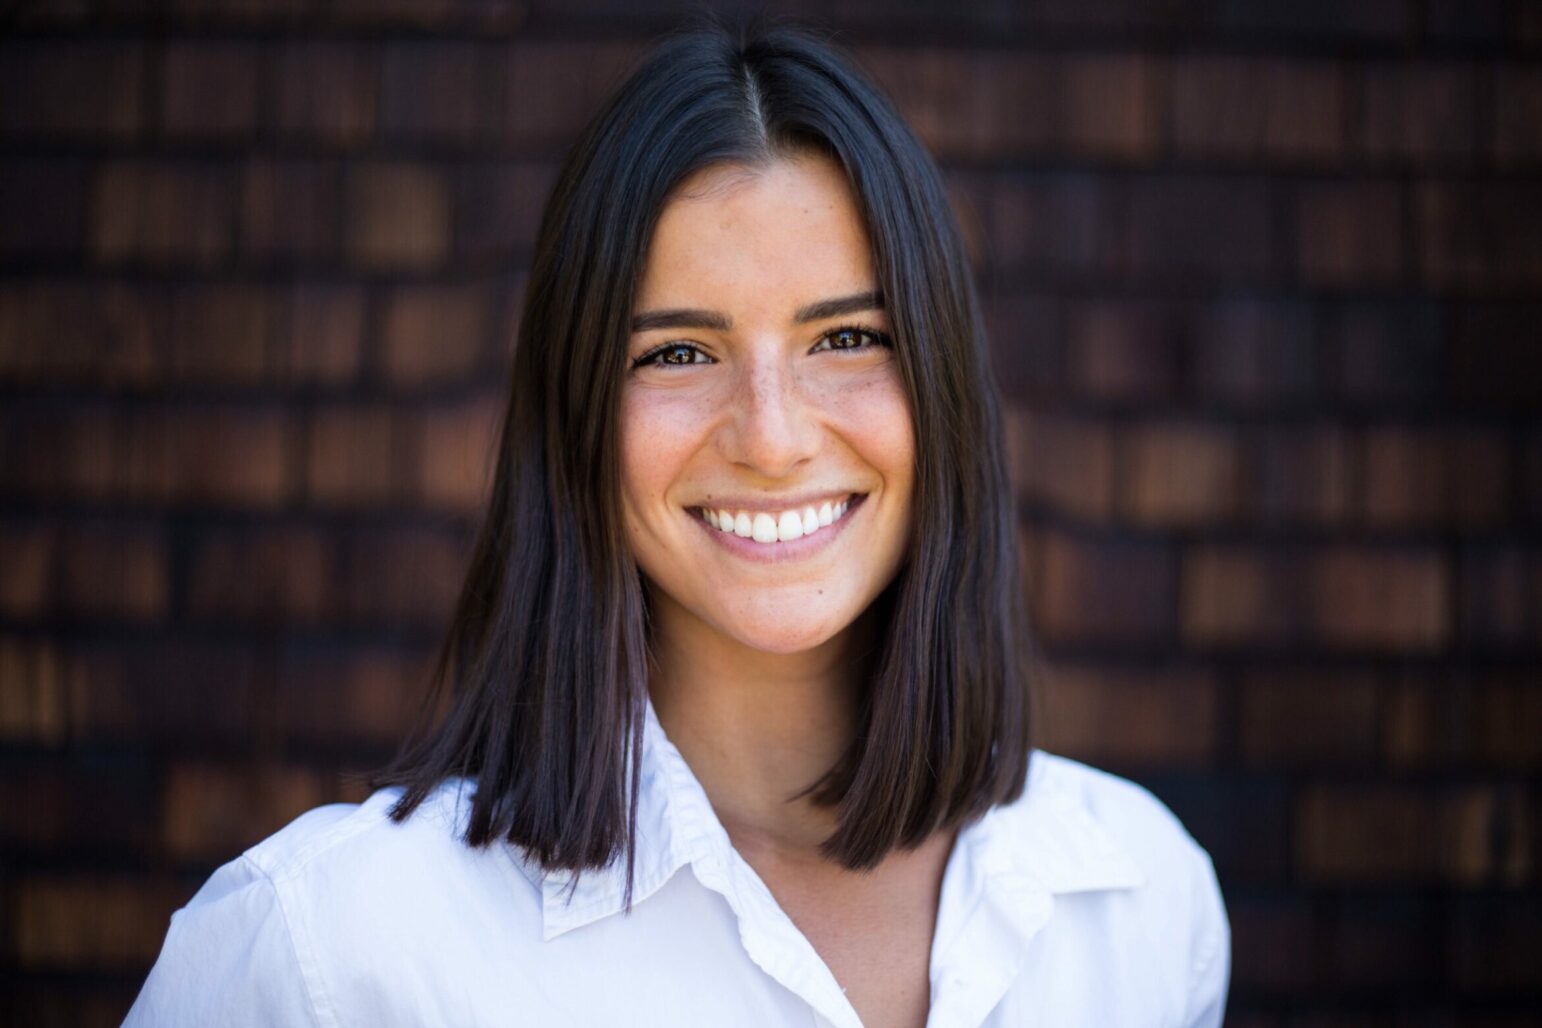 A woman in her 20s smiling broadly at the camera. She has dark shoulder-length hair and is wearing a crisp white professional shirt. She stands against a background of wood shingles that are pleasantly out of focus due to depth of field.